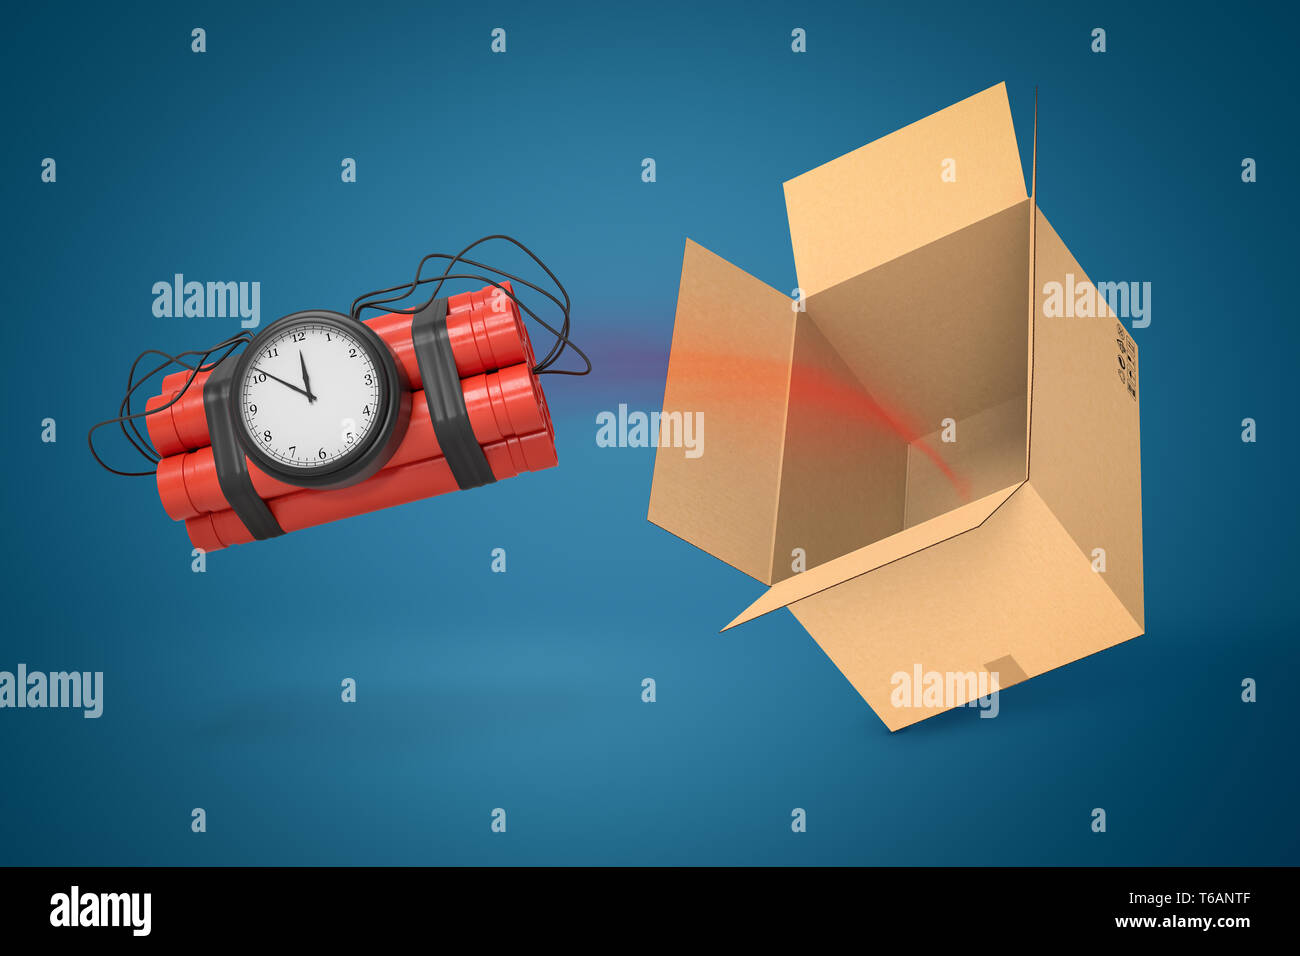 3d rendering dynamite bundle with timer bomb flying out of cardboard box, suspended in air on blue background. Stock Photo